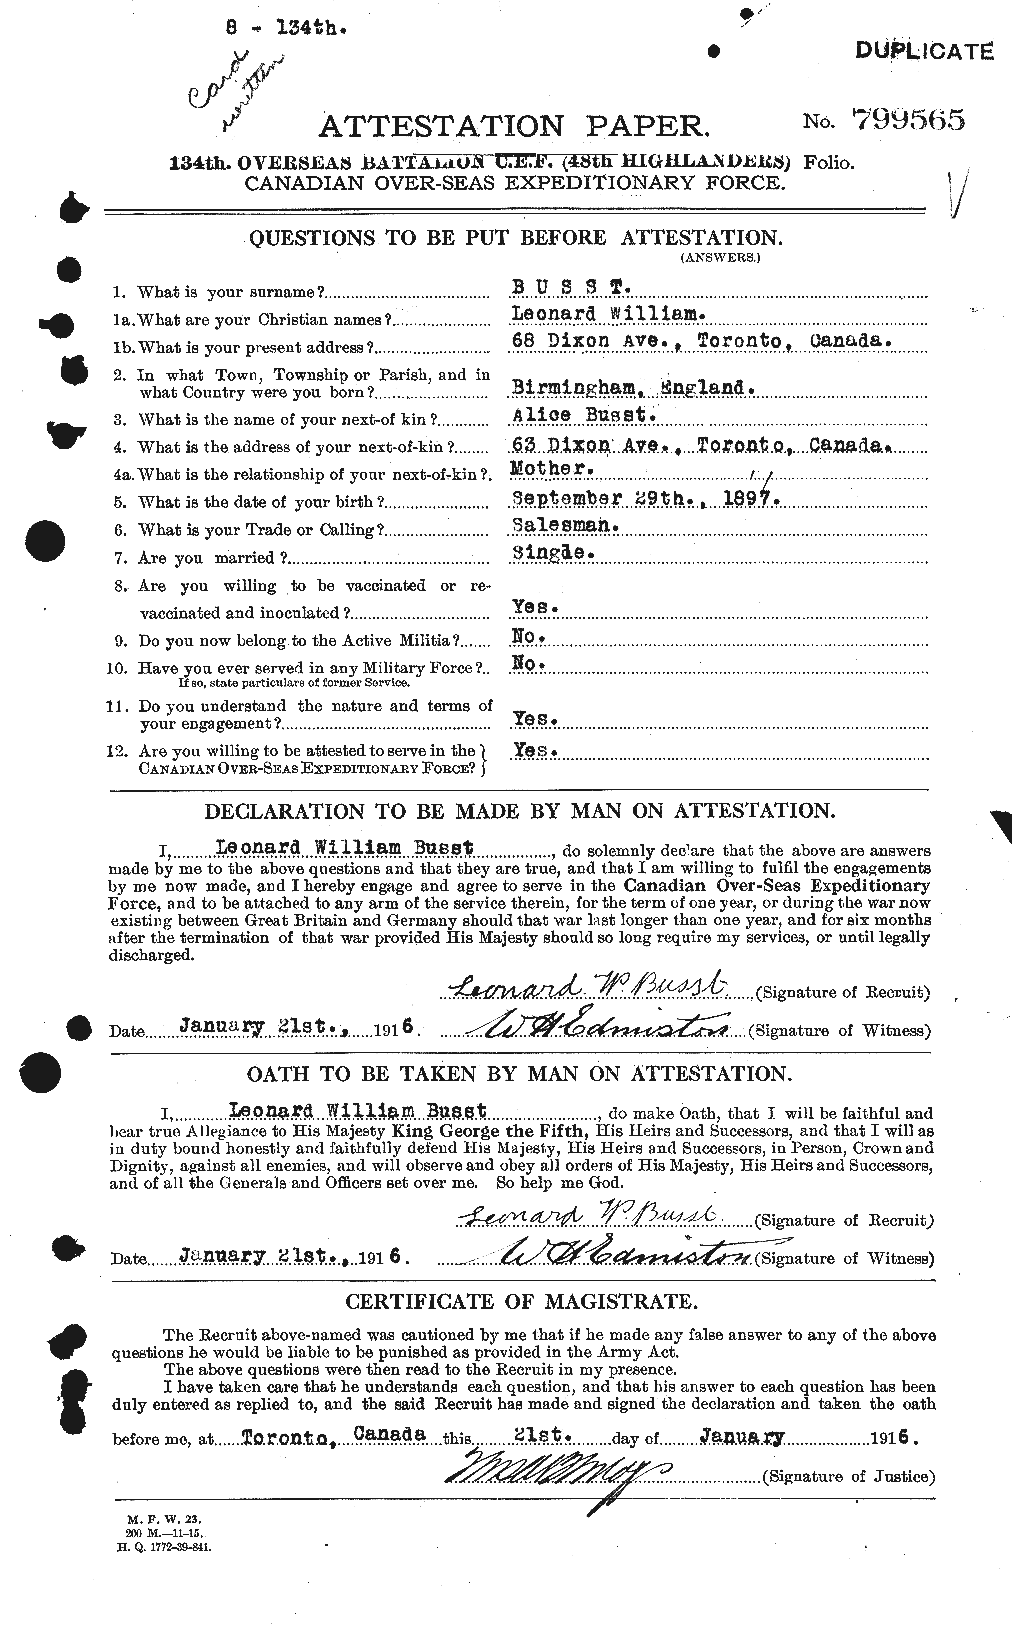 Personnel Records of the First World War - CEF 274642a